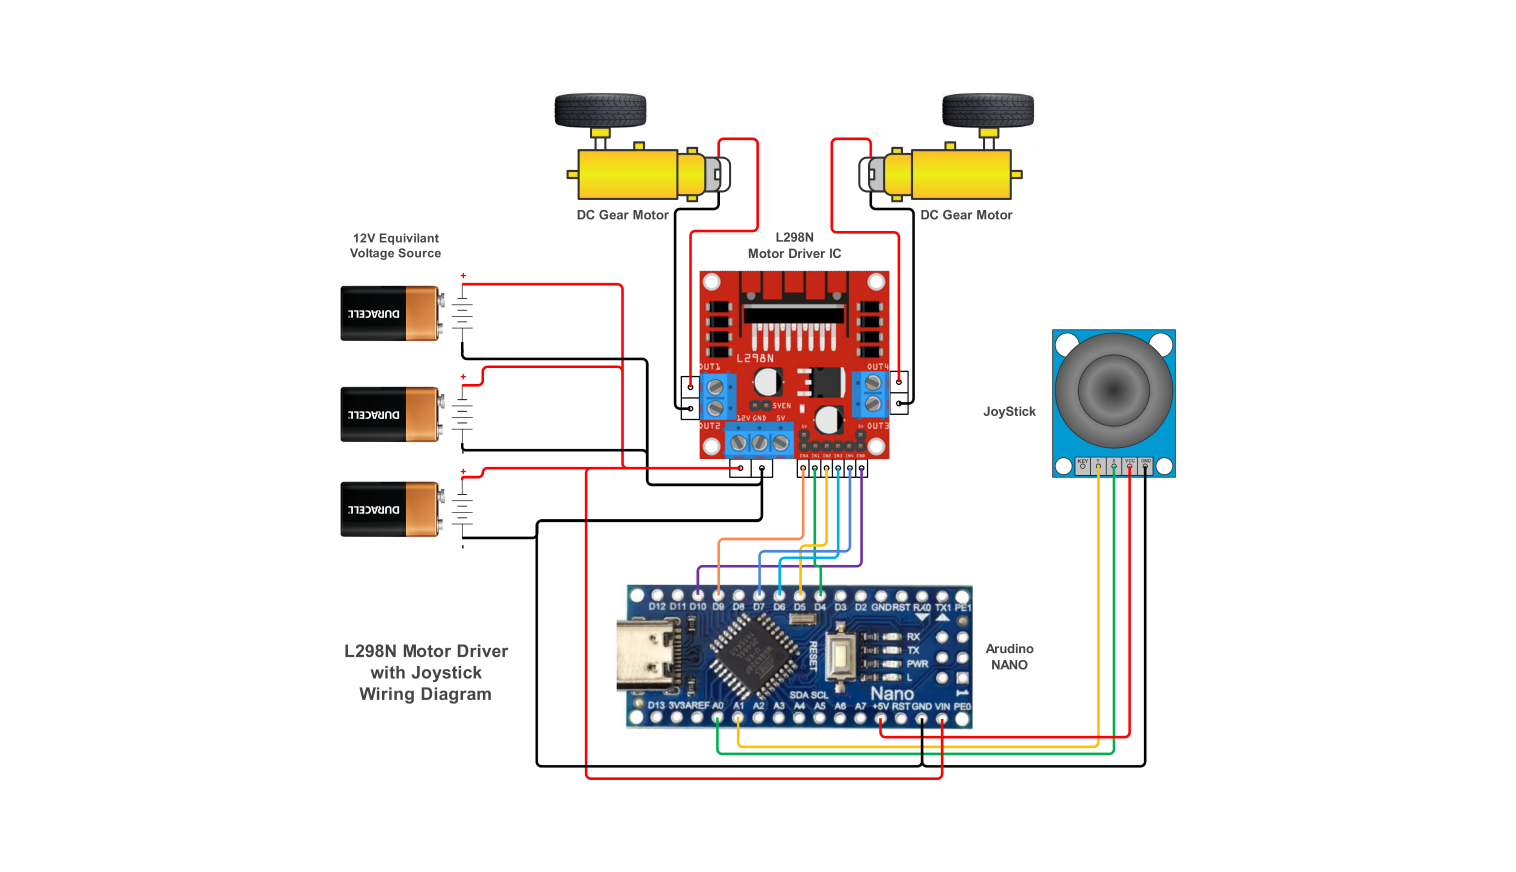 L298N motor driver with joystick wiring diagram